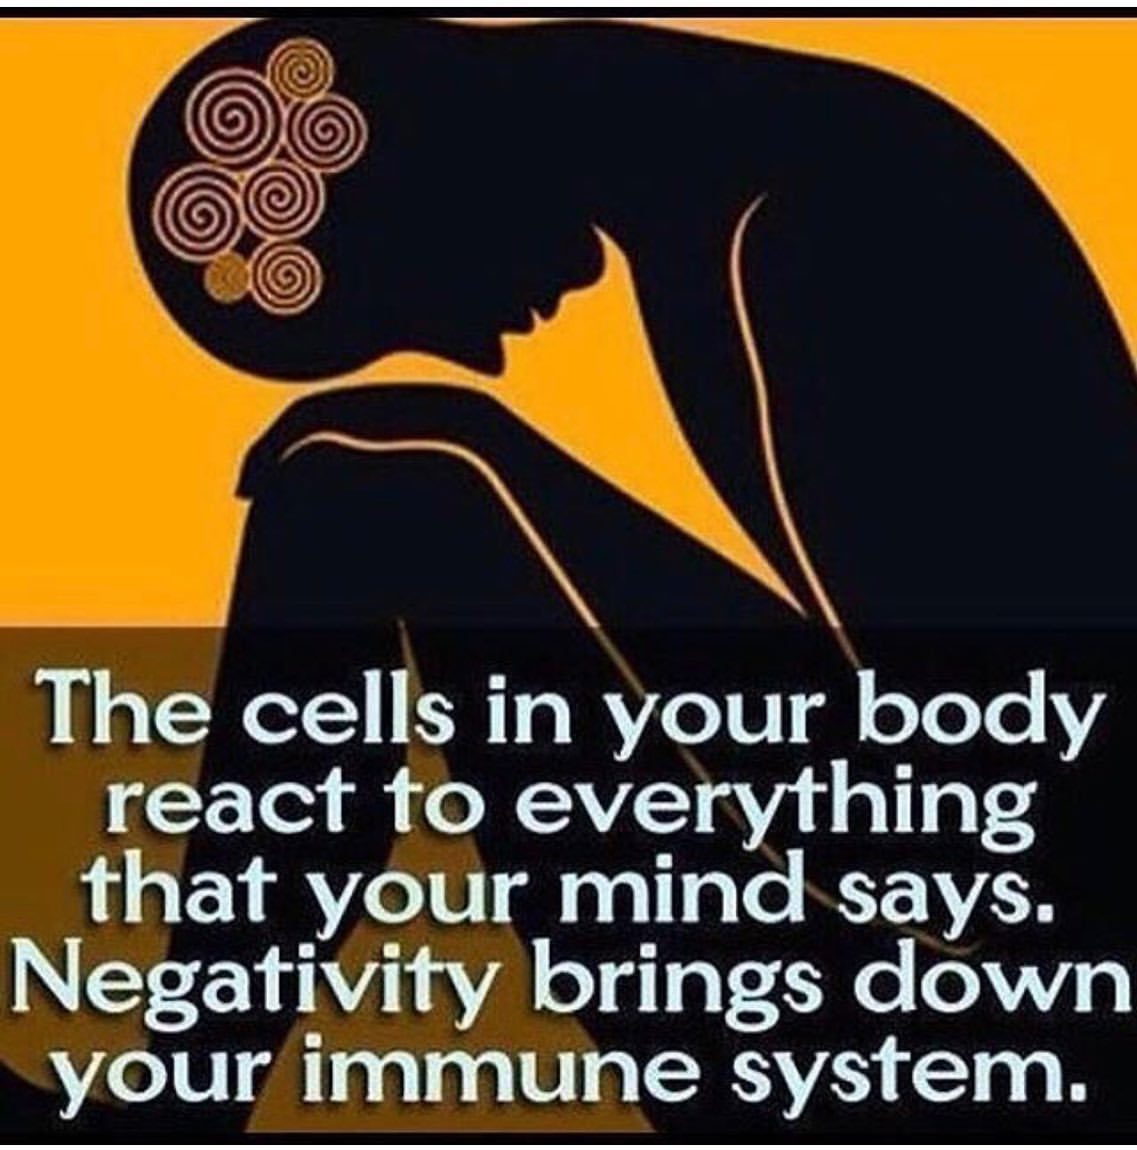 The cells in our body react to everything that your mind says. Negativity brings down your immune system.